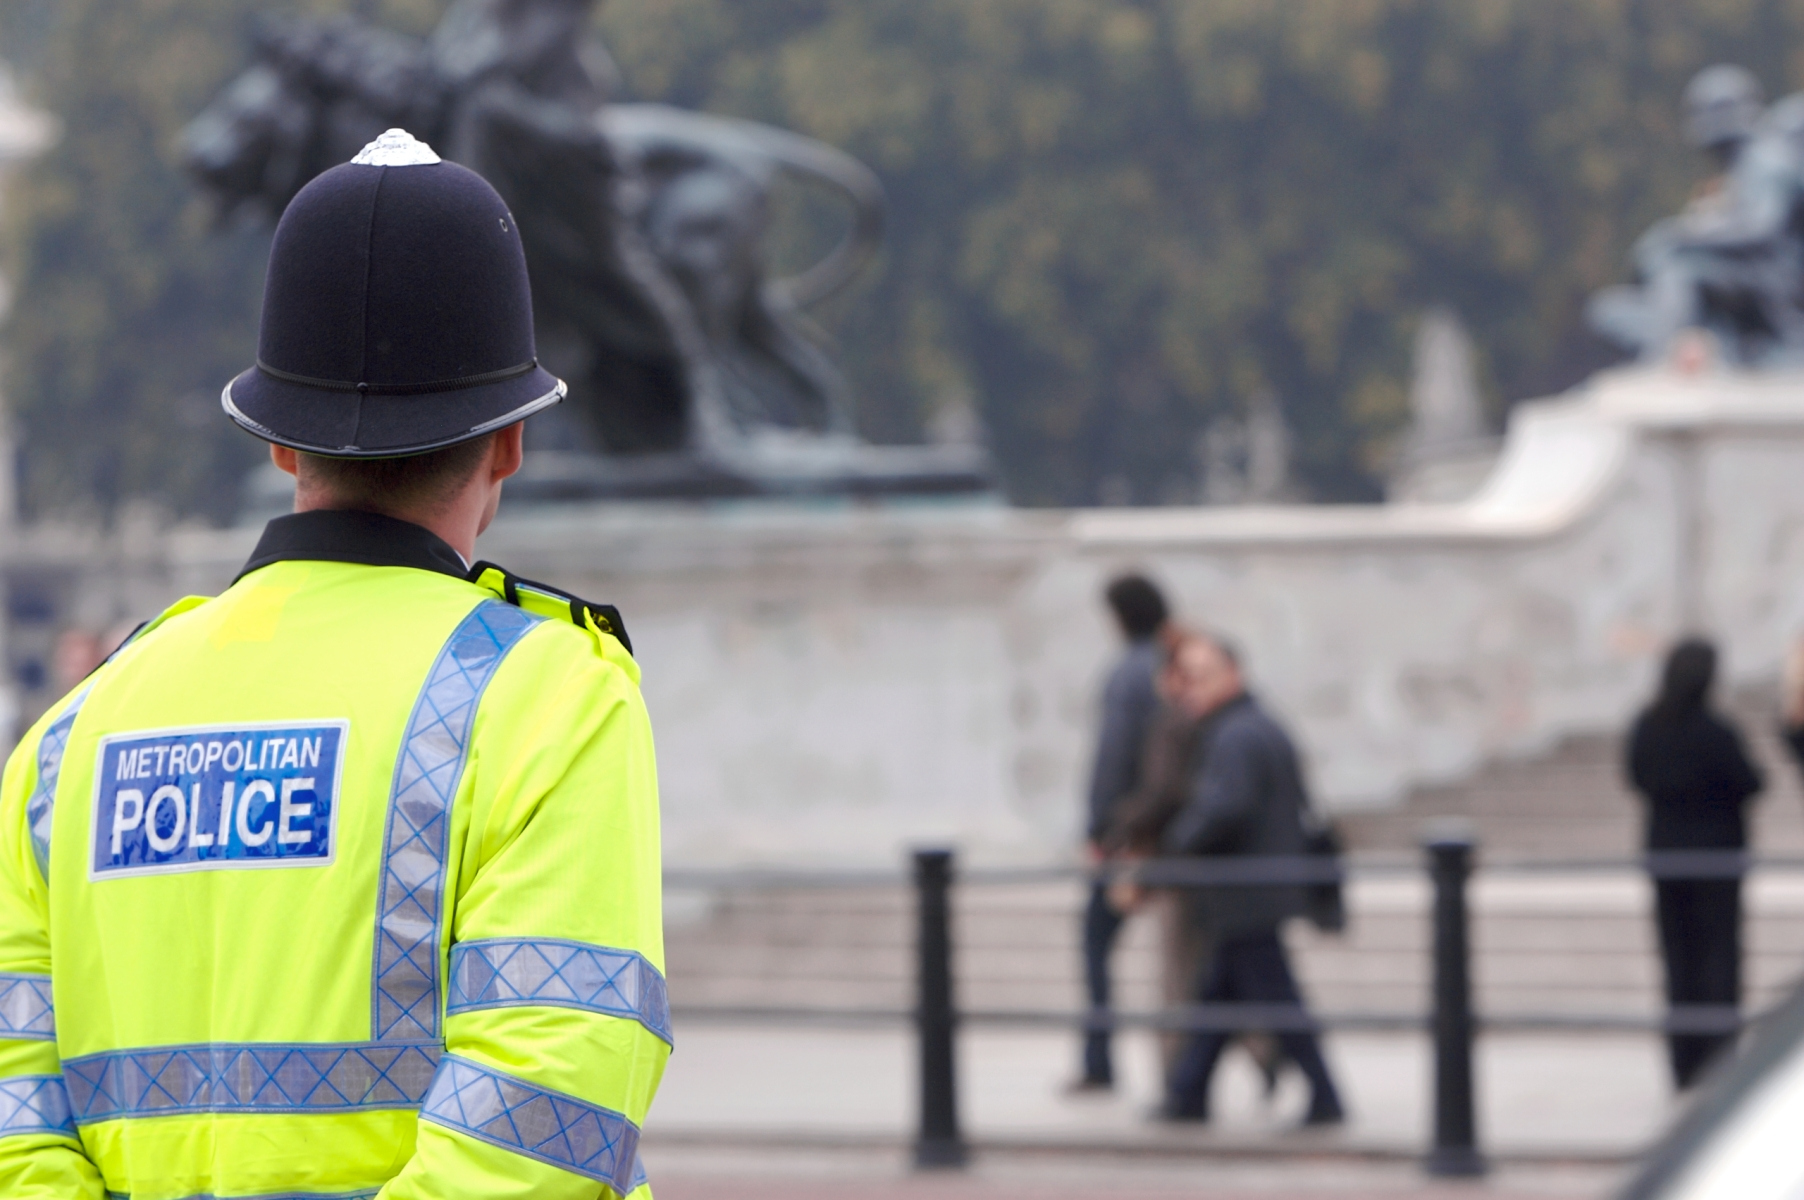 Black Teen Attempts Suicide After Being Strip-Searched By Metropolitan Police